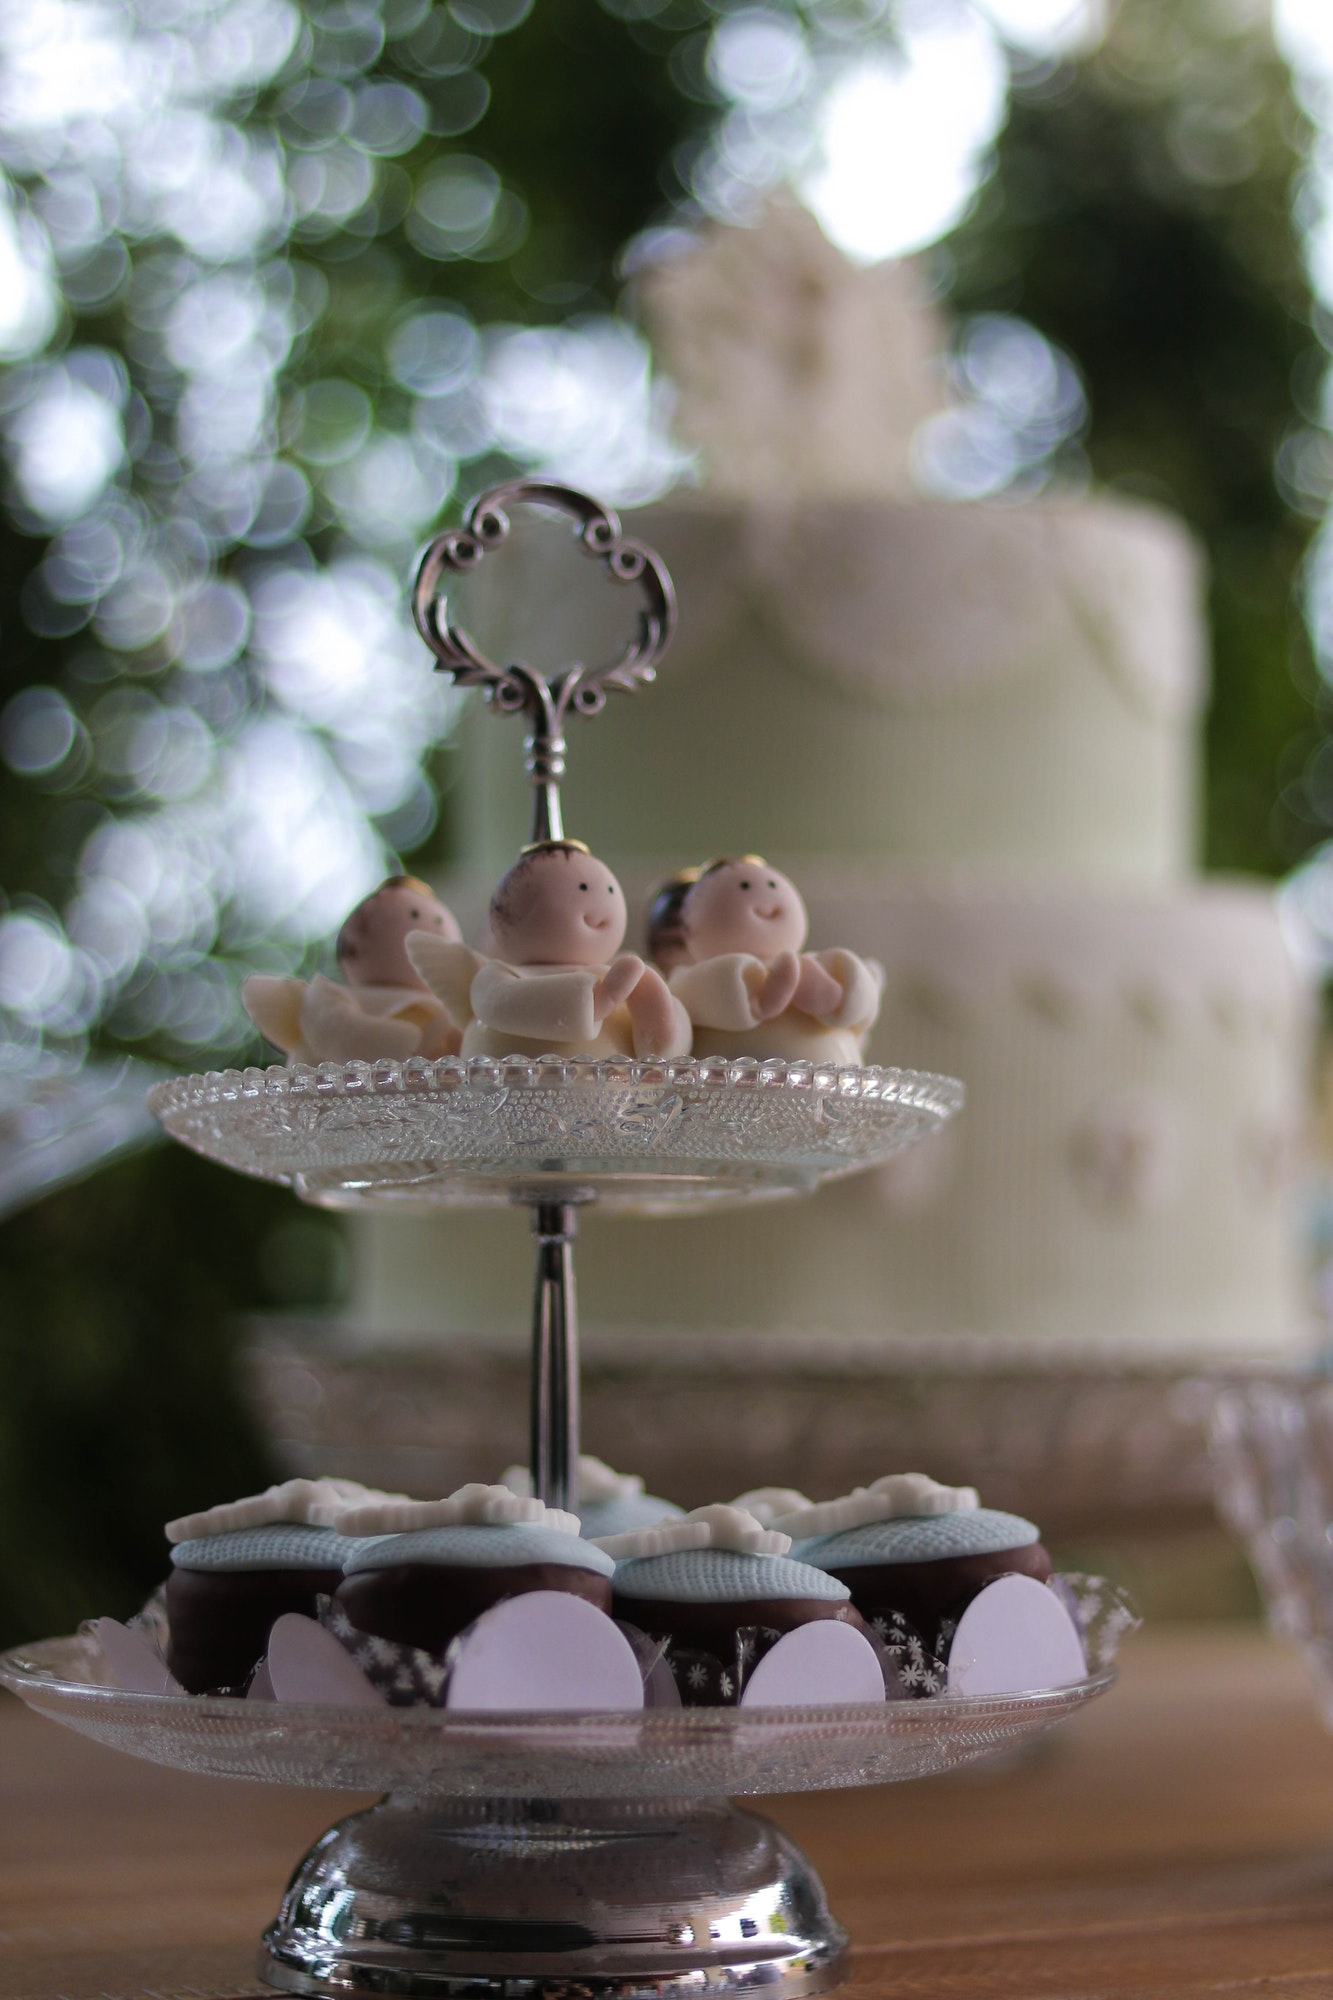 sweets and decorations from a christening party with a cake in depth of field as background